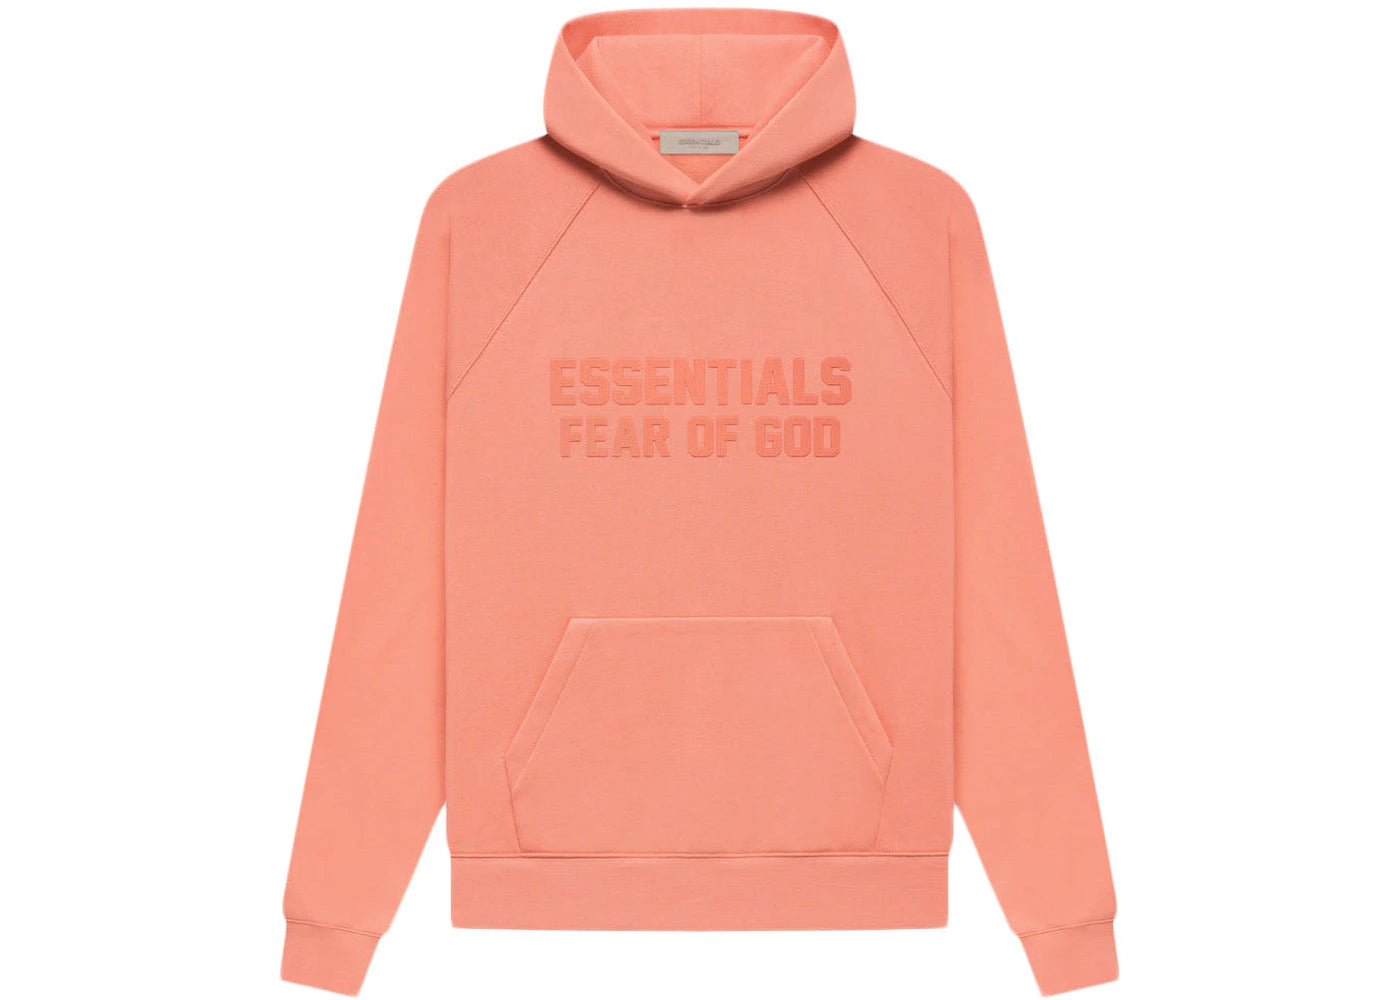 Essentialls Fear Of God Hoodie "Coral"